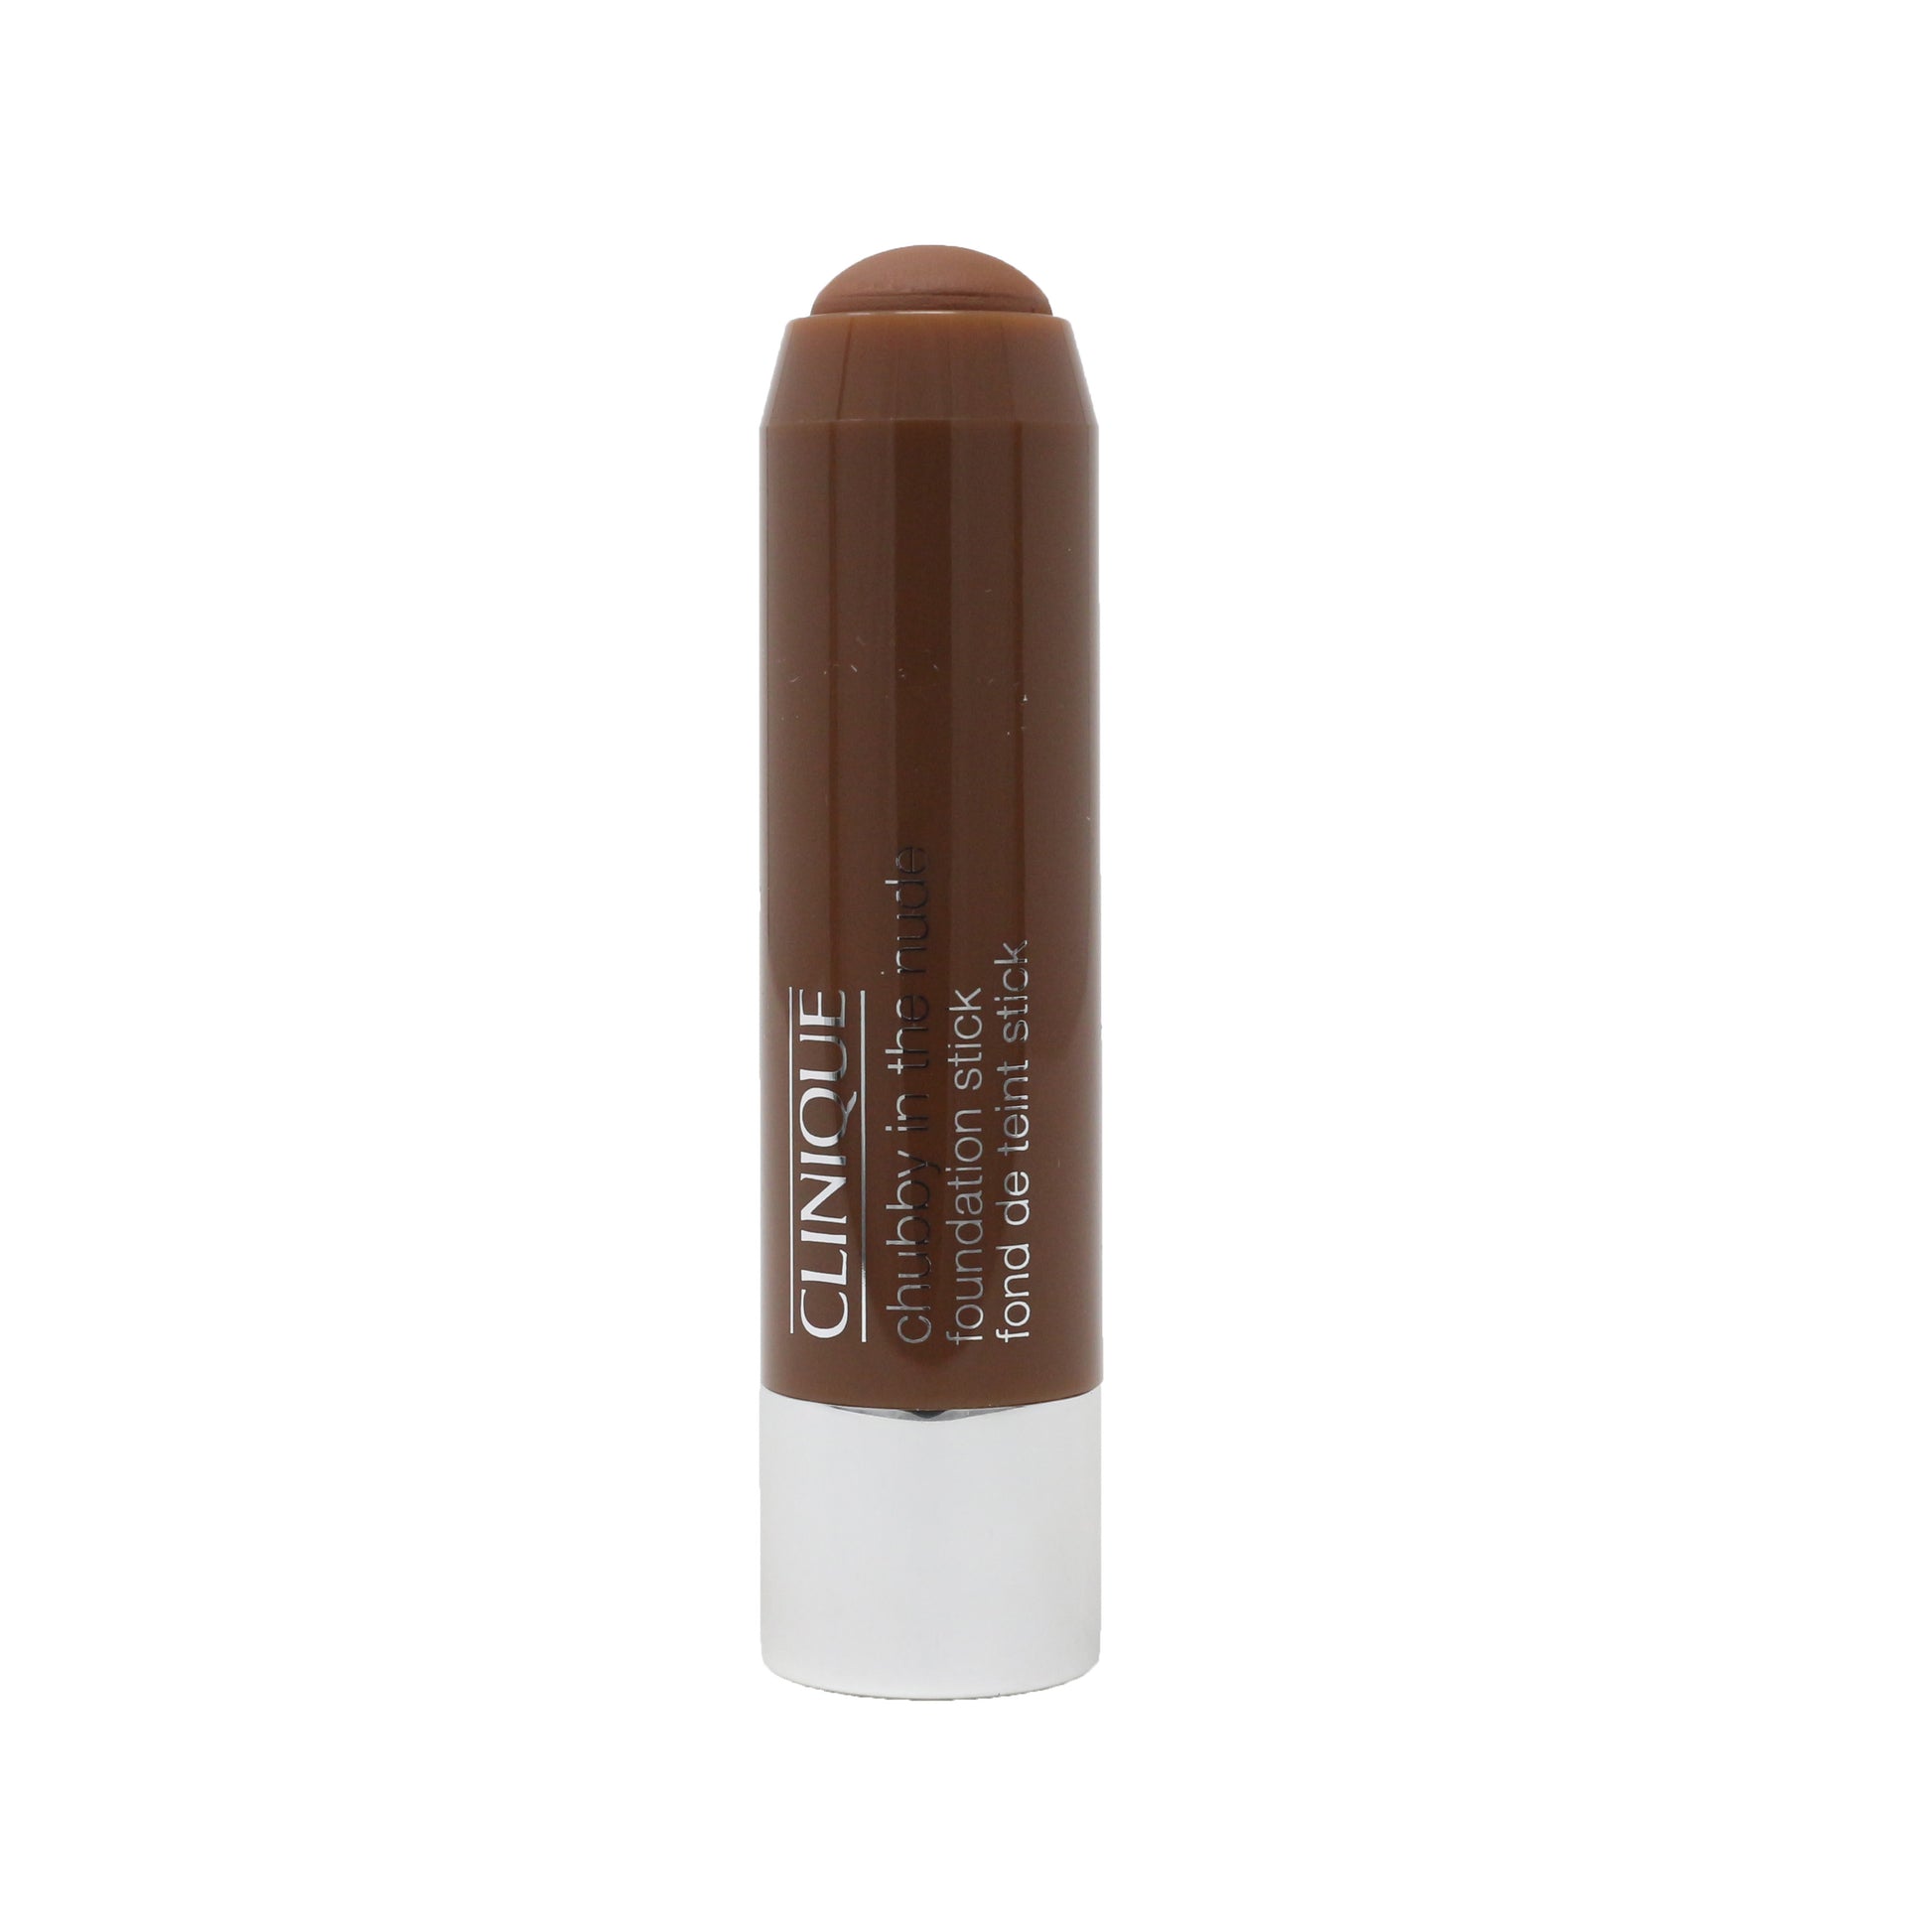 Chubby In The Nude Foundation Stick 6 mL